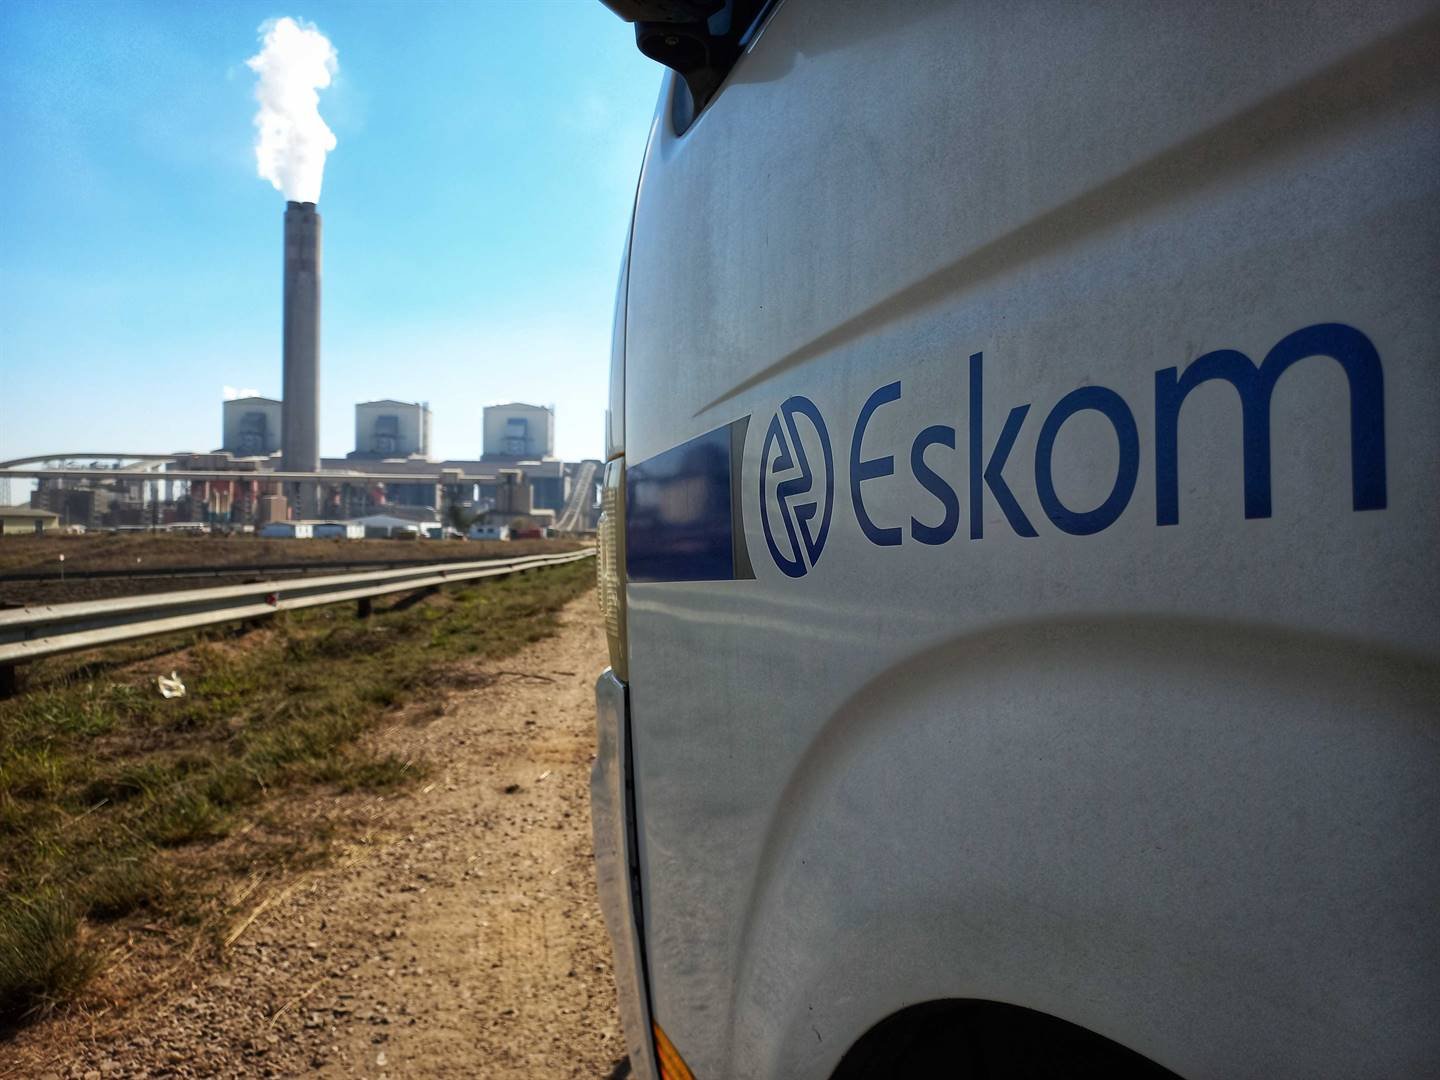 Eskom has been ordered by the court to hand over documents to Afriforum